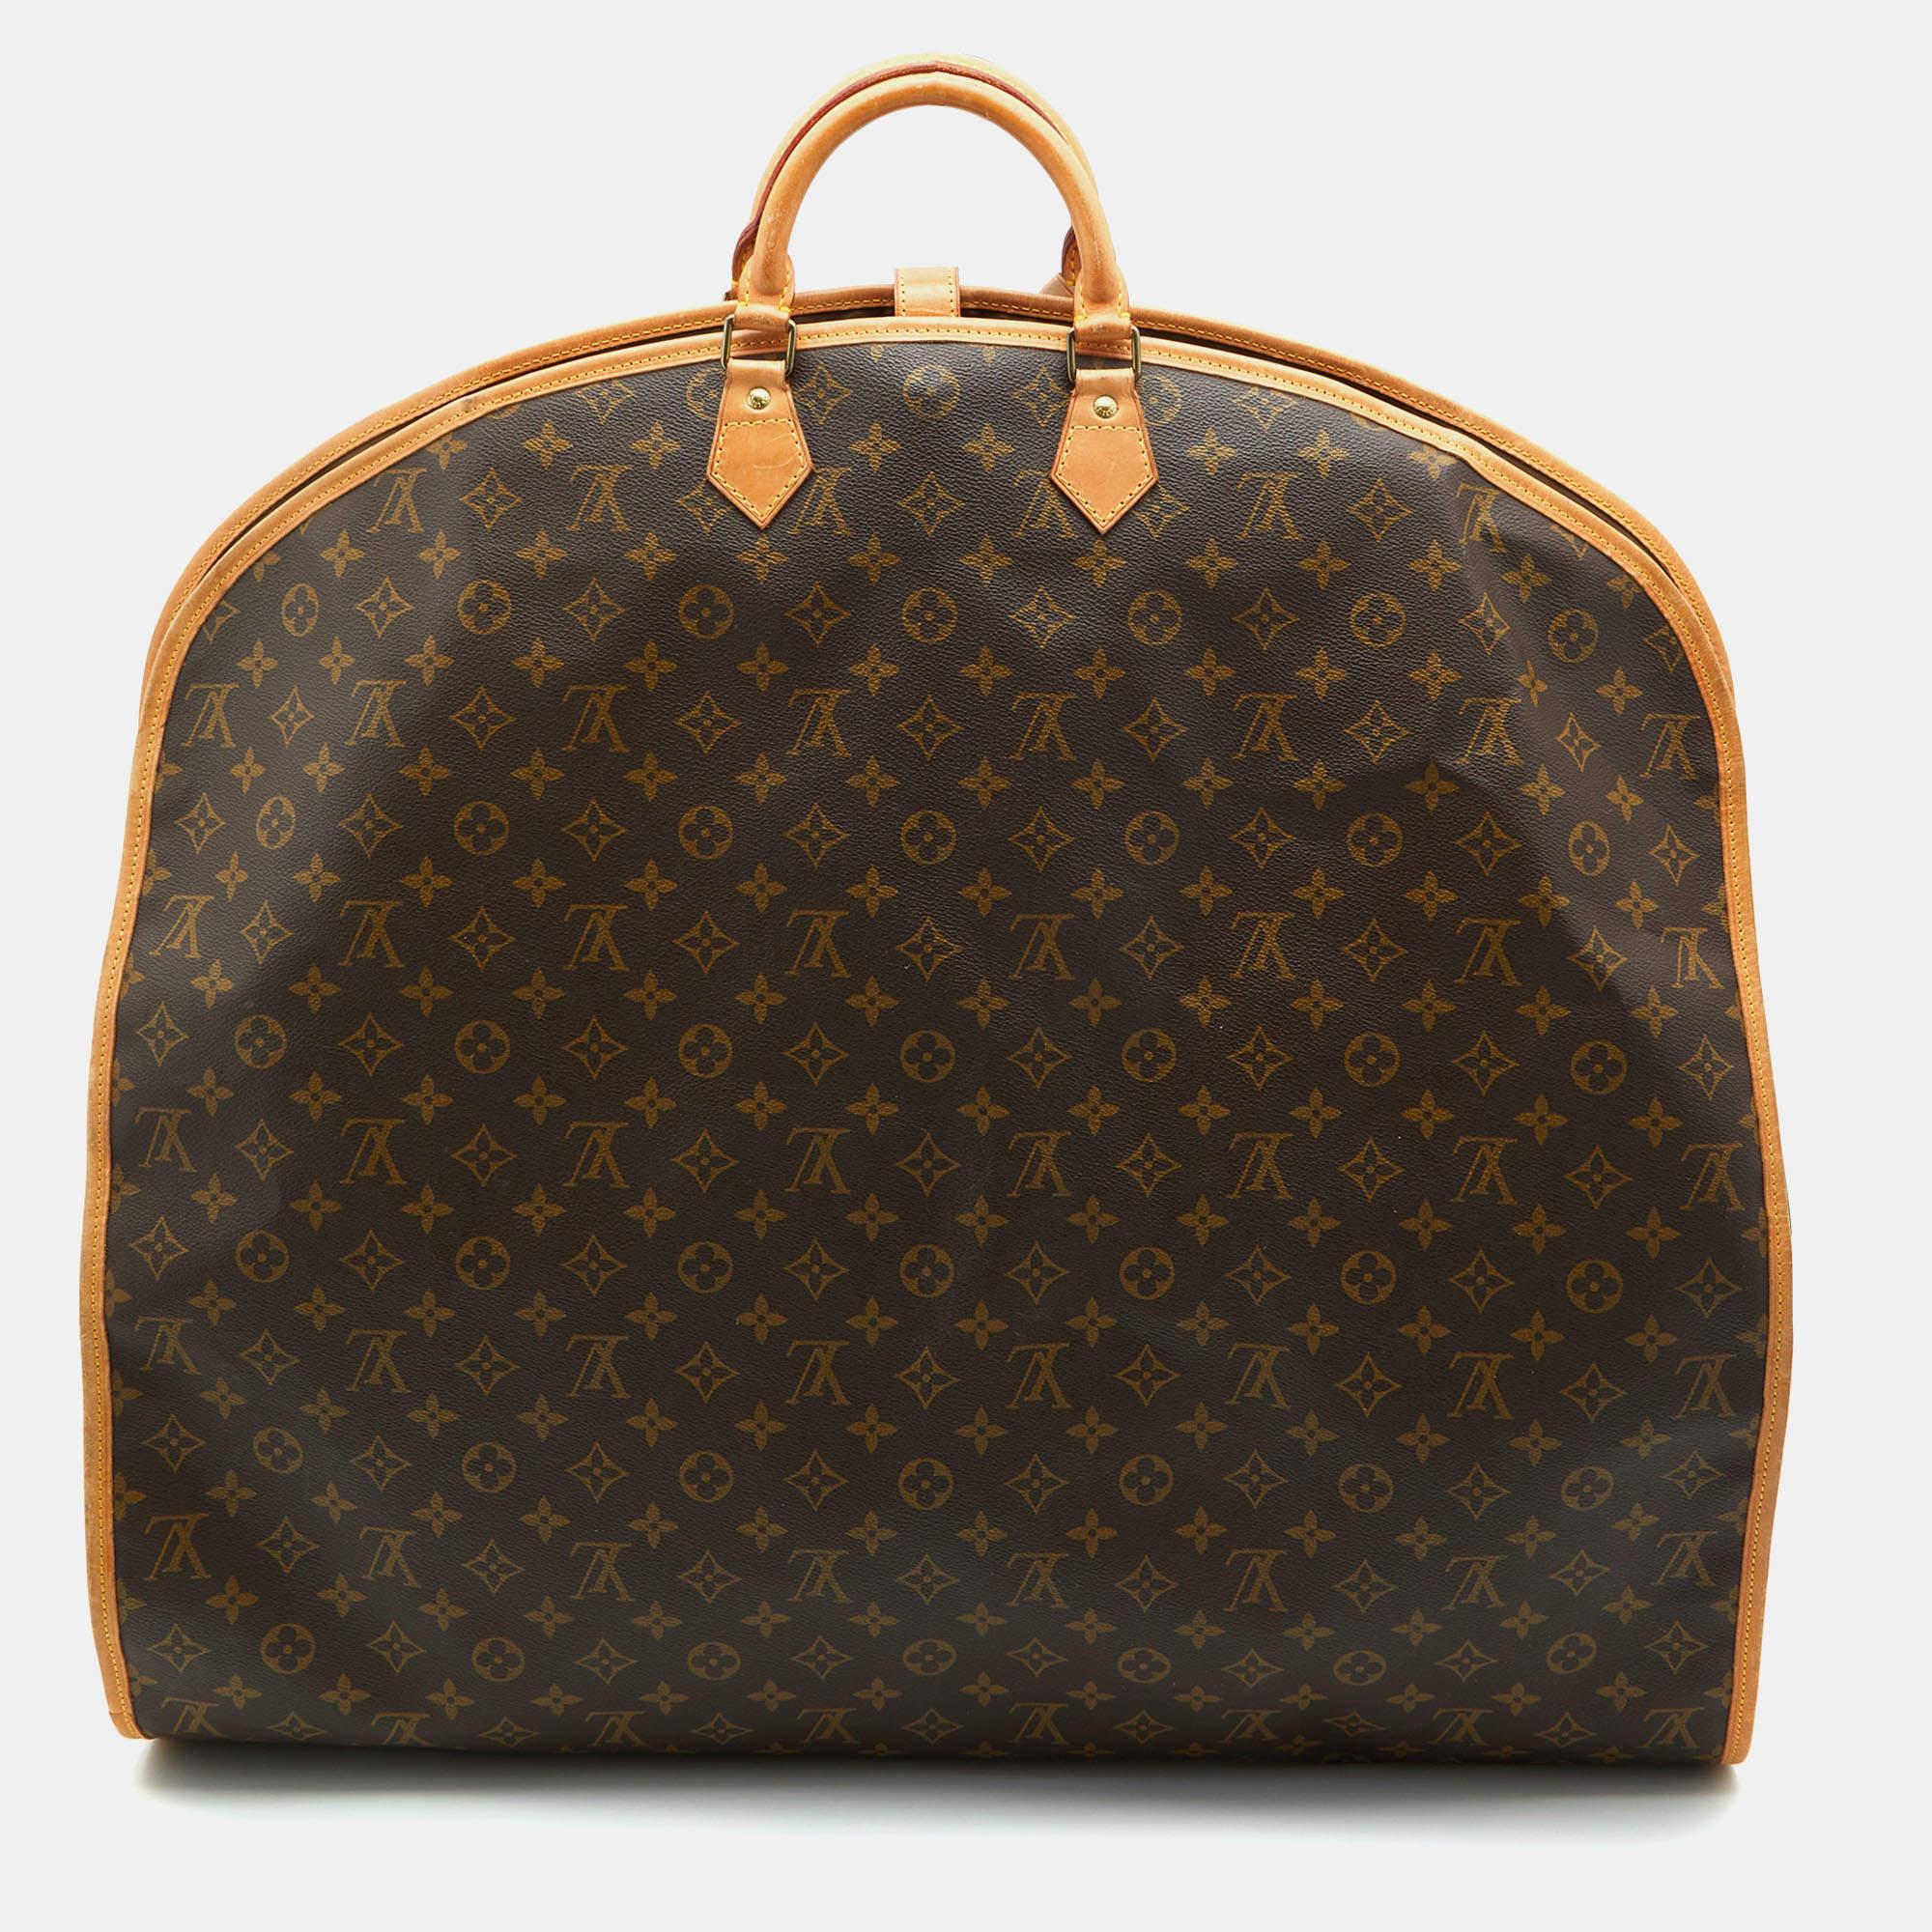 Louis Vuitton assists you in making travel easy by extending this stylish and super-functional garment cover. A delight for jet-setting people, the cover is crafted from the signature Monogram coated canvas along with leather trims.

Includes: